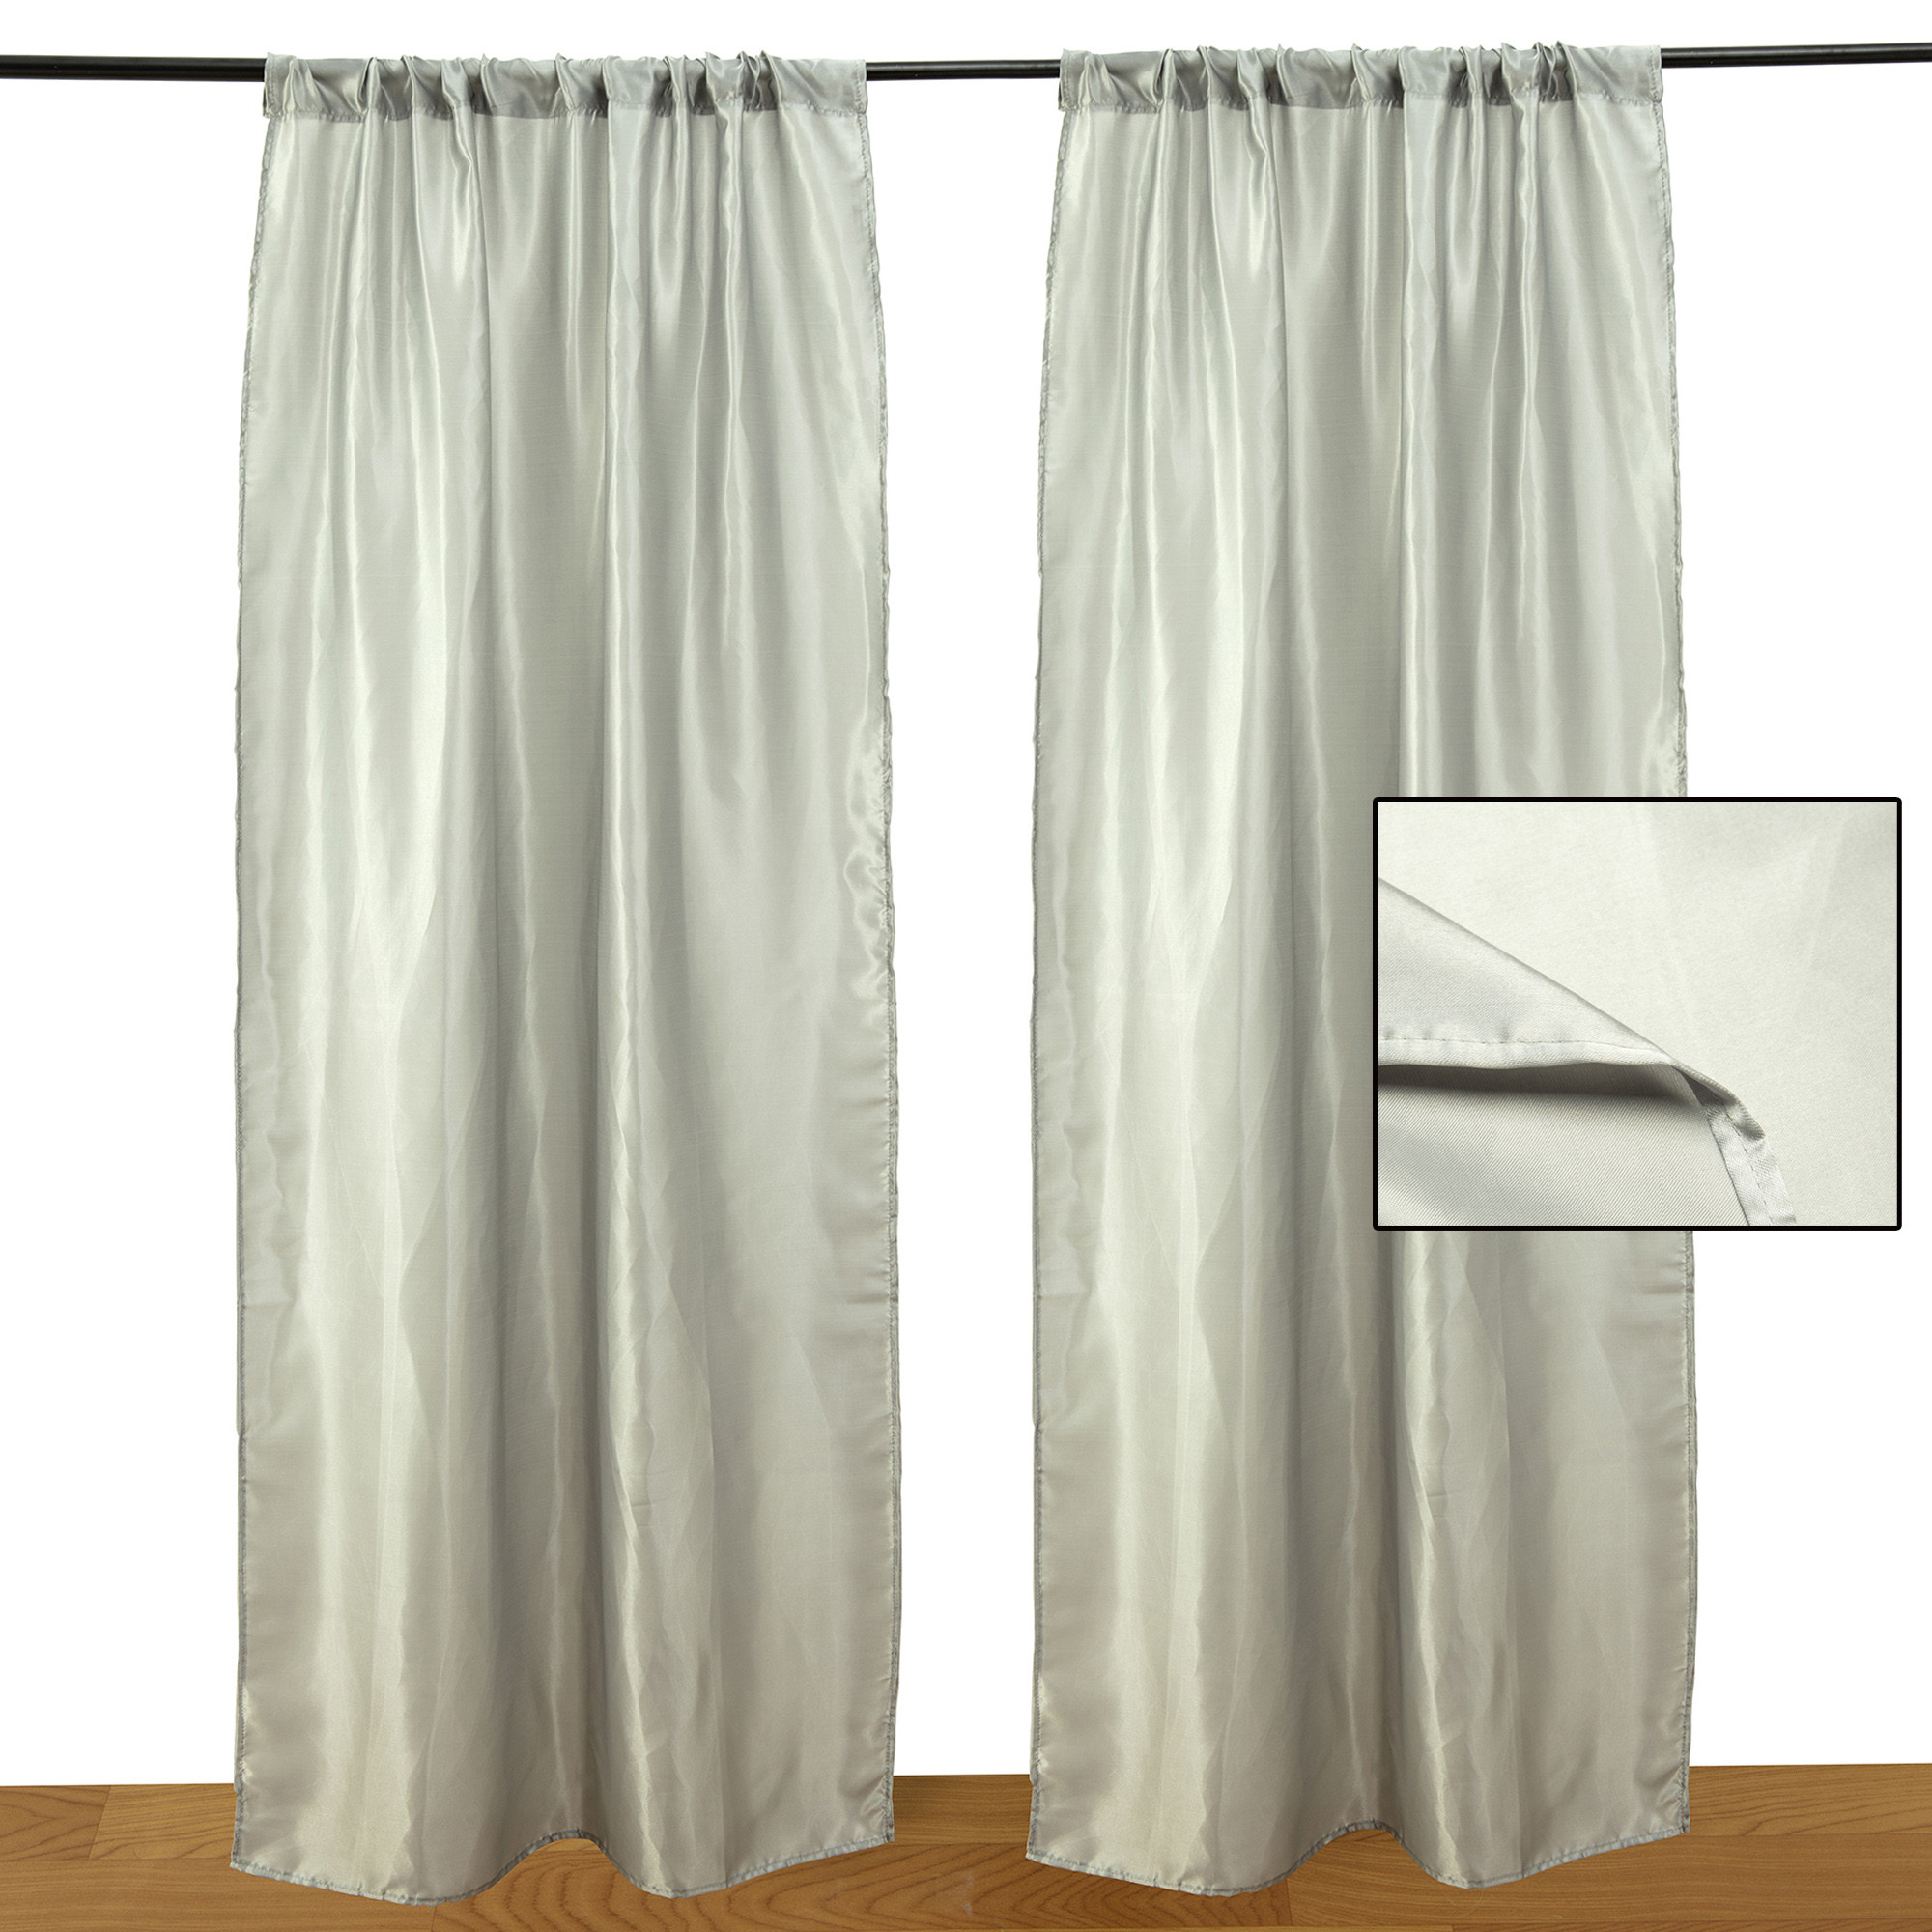 Walmart Curtains For Living Room
 NK Blackout Window Curtains Room Darkening Curtain Set for